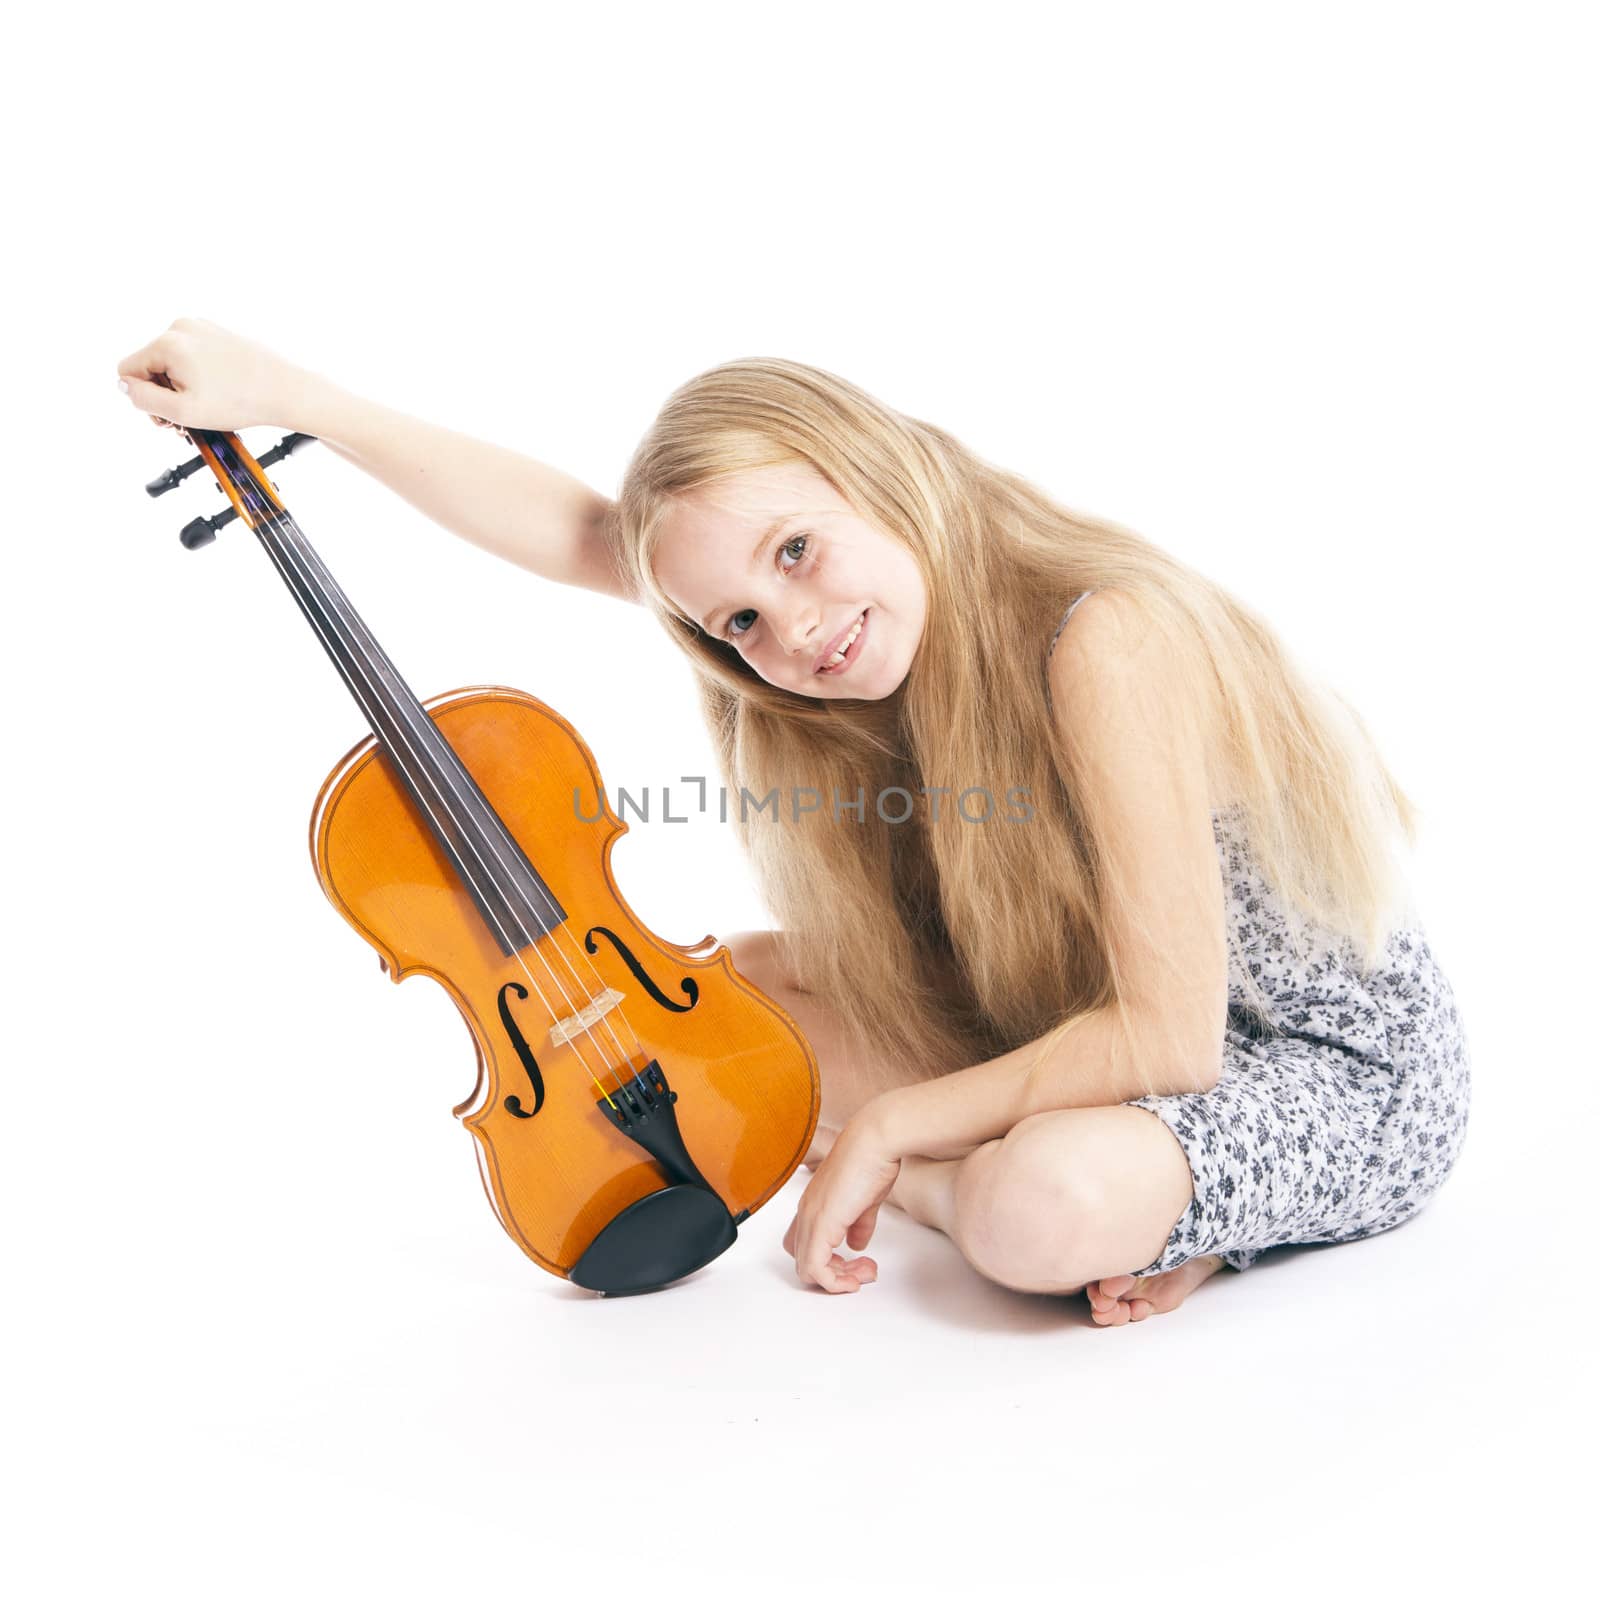 young girl in dress happy with violin in studio against white background